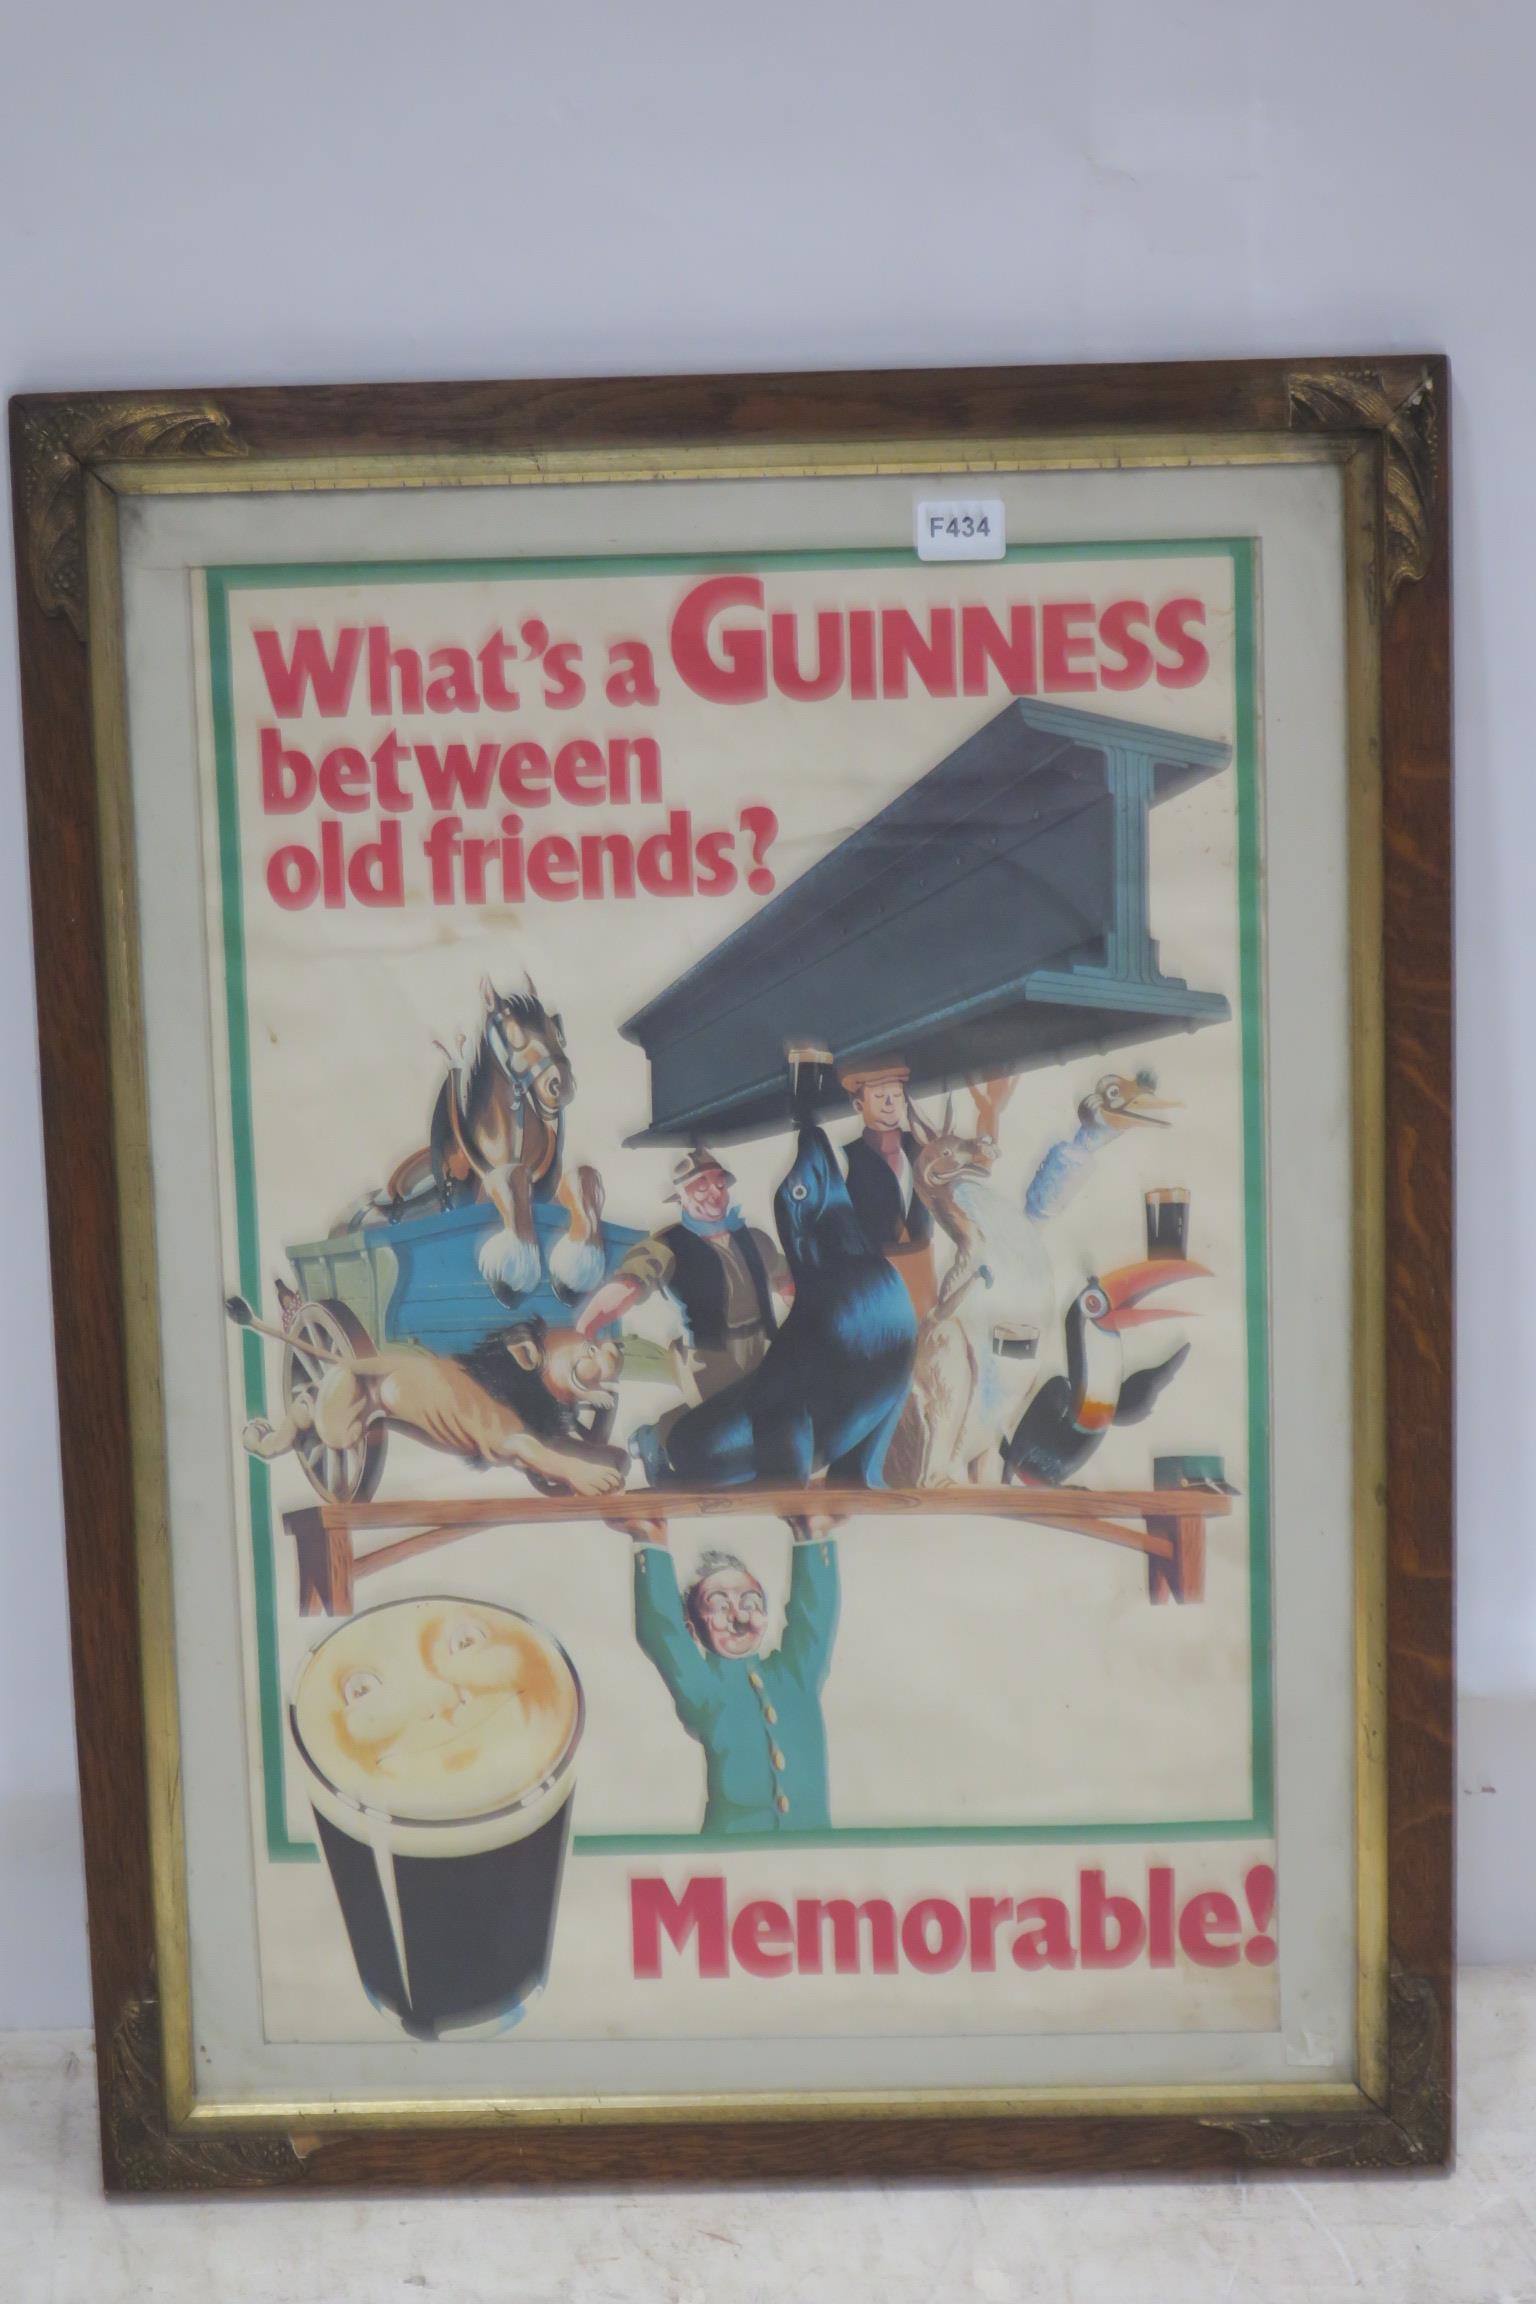 A GUINNESS ADVERTISING SIGN inscribed What's a Guinness Between Old Friends? Memorable! in oak and